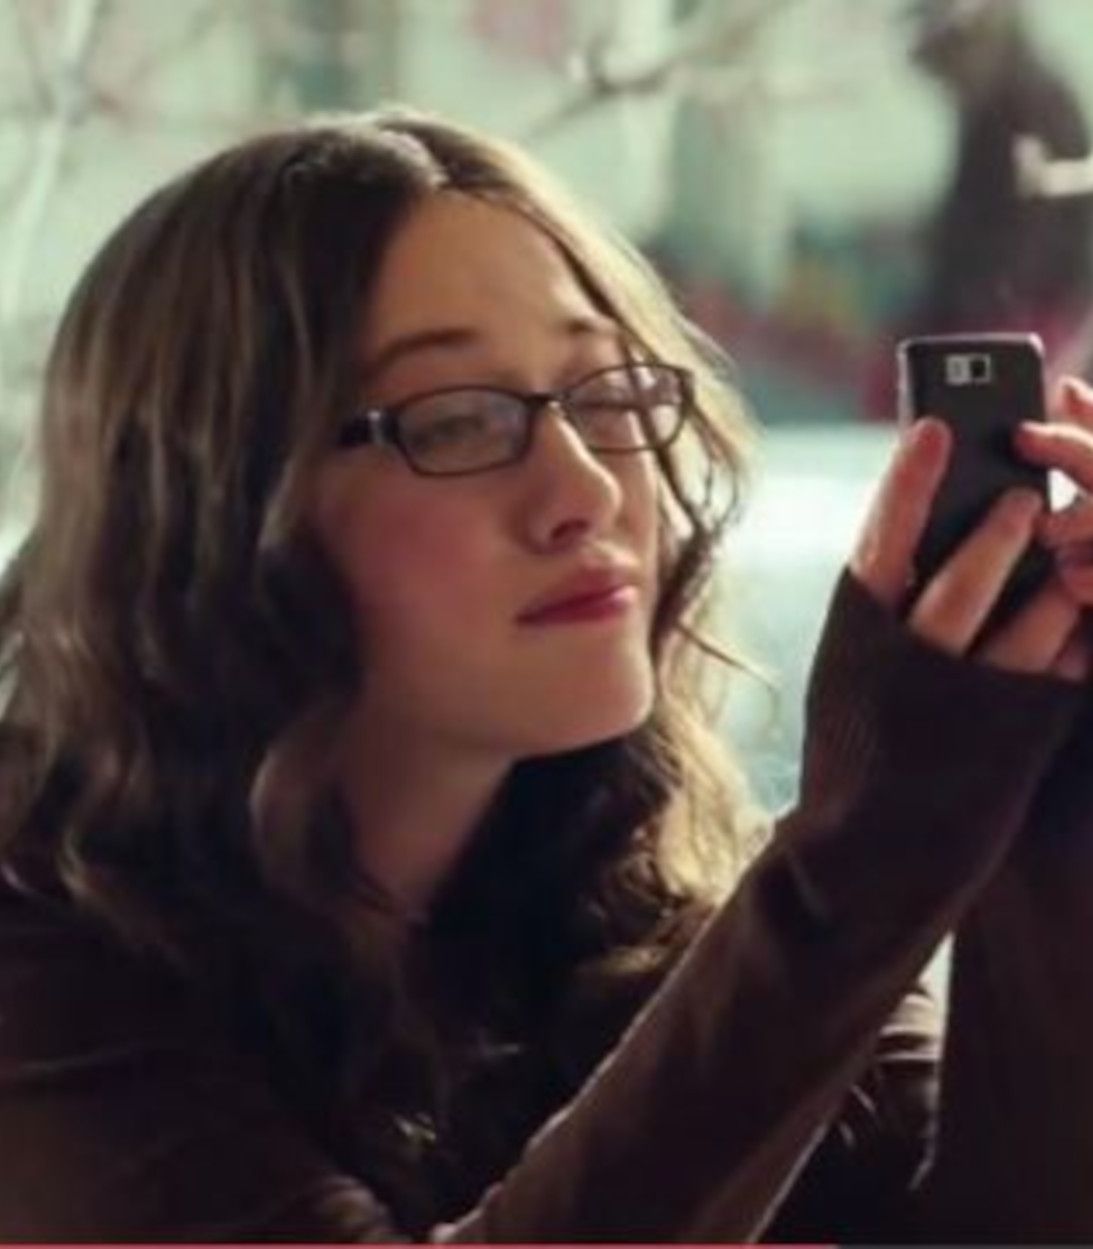 Thor - Kat Dennings as Darcy Lewis with cellphone